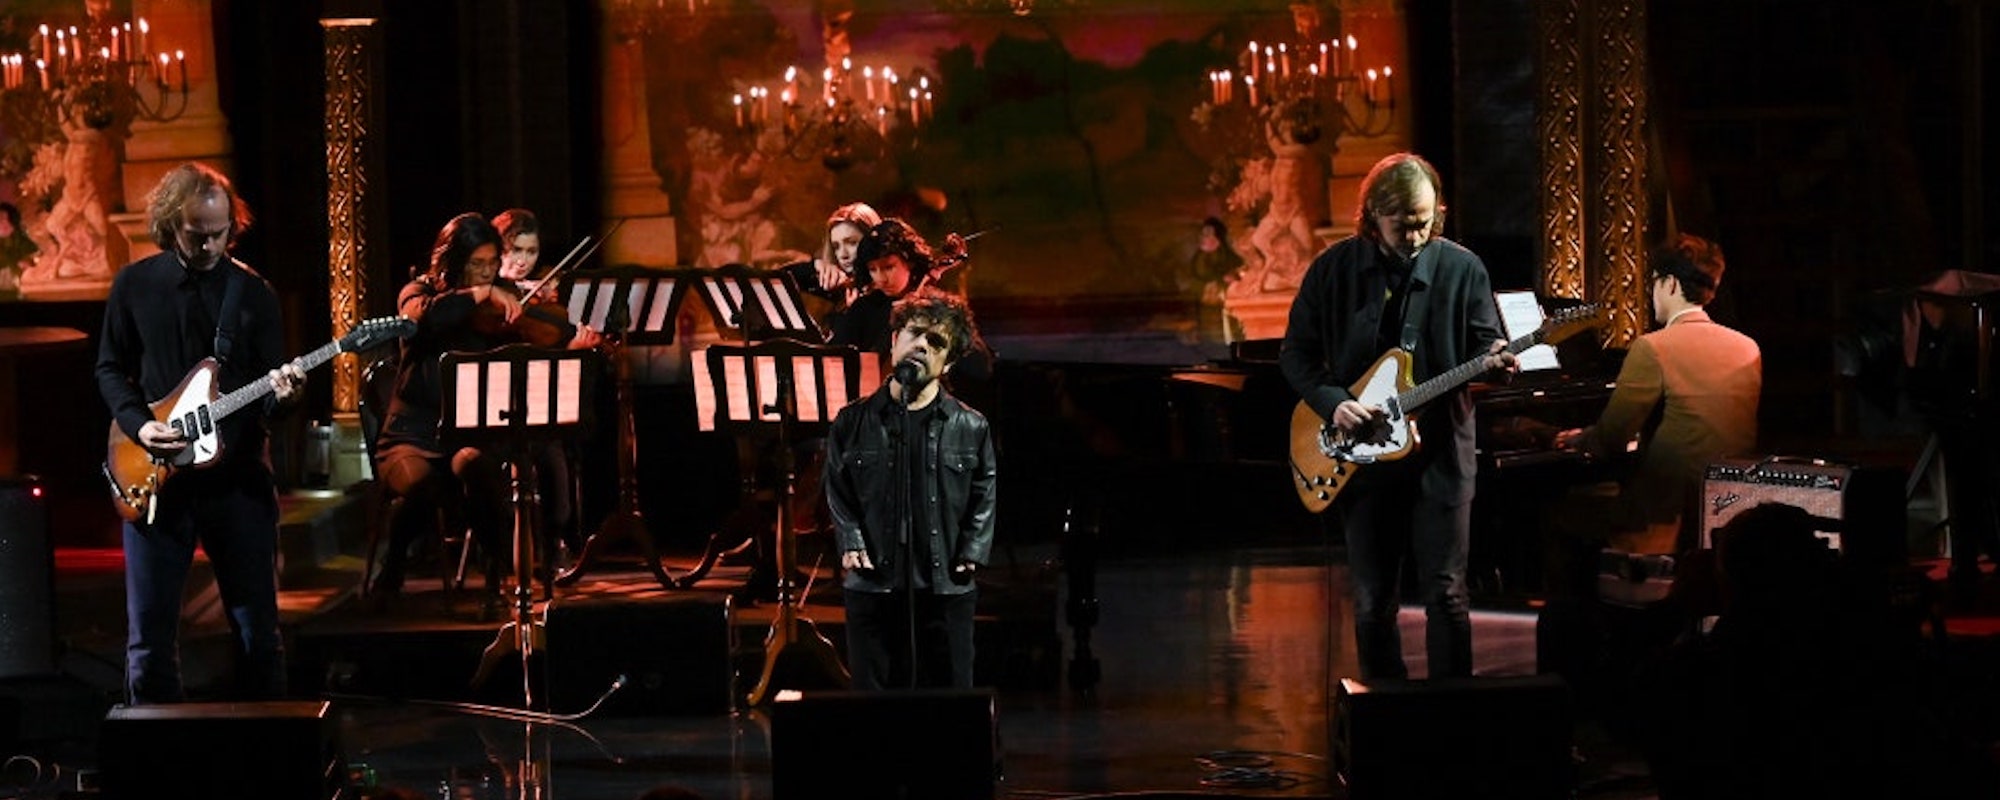 ‘Game of Thrones’ Star Peter Dinklage Joins The National on ‘Colbert’